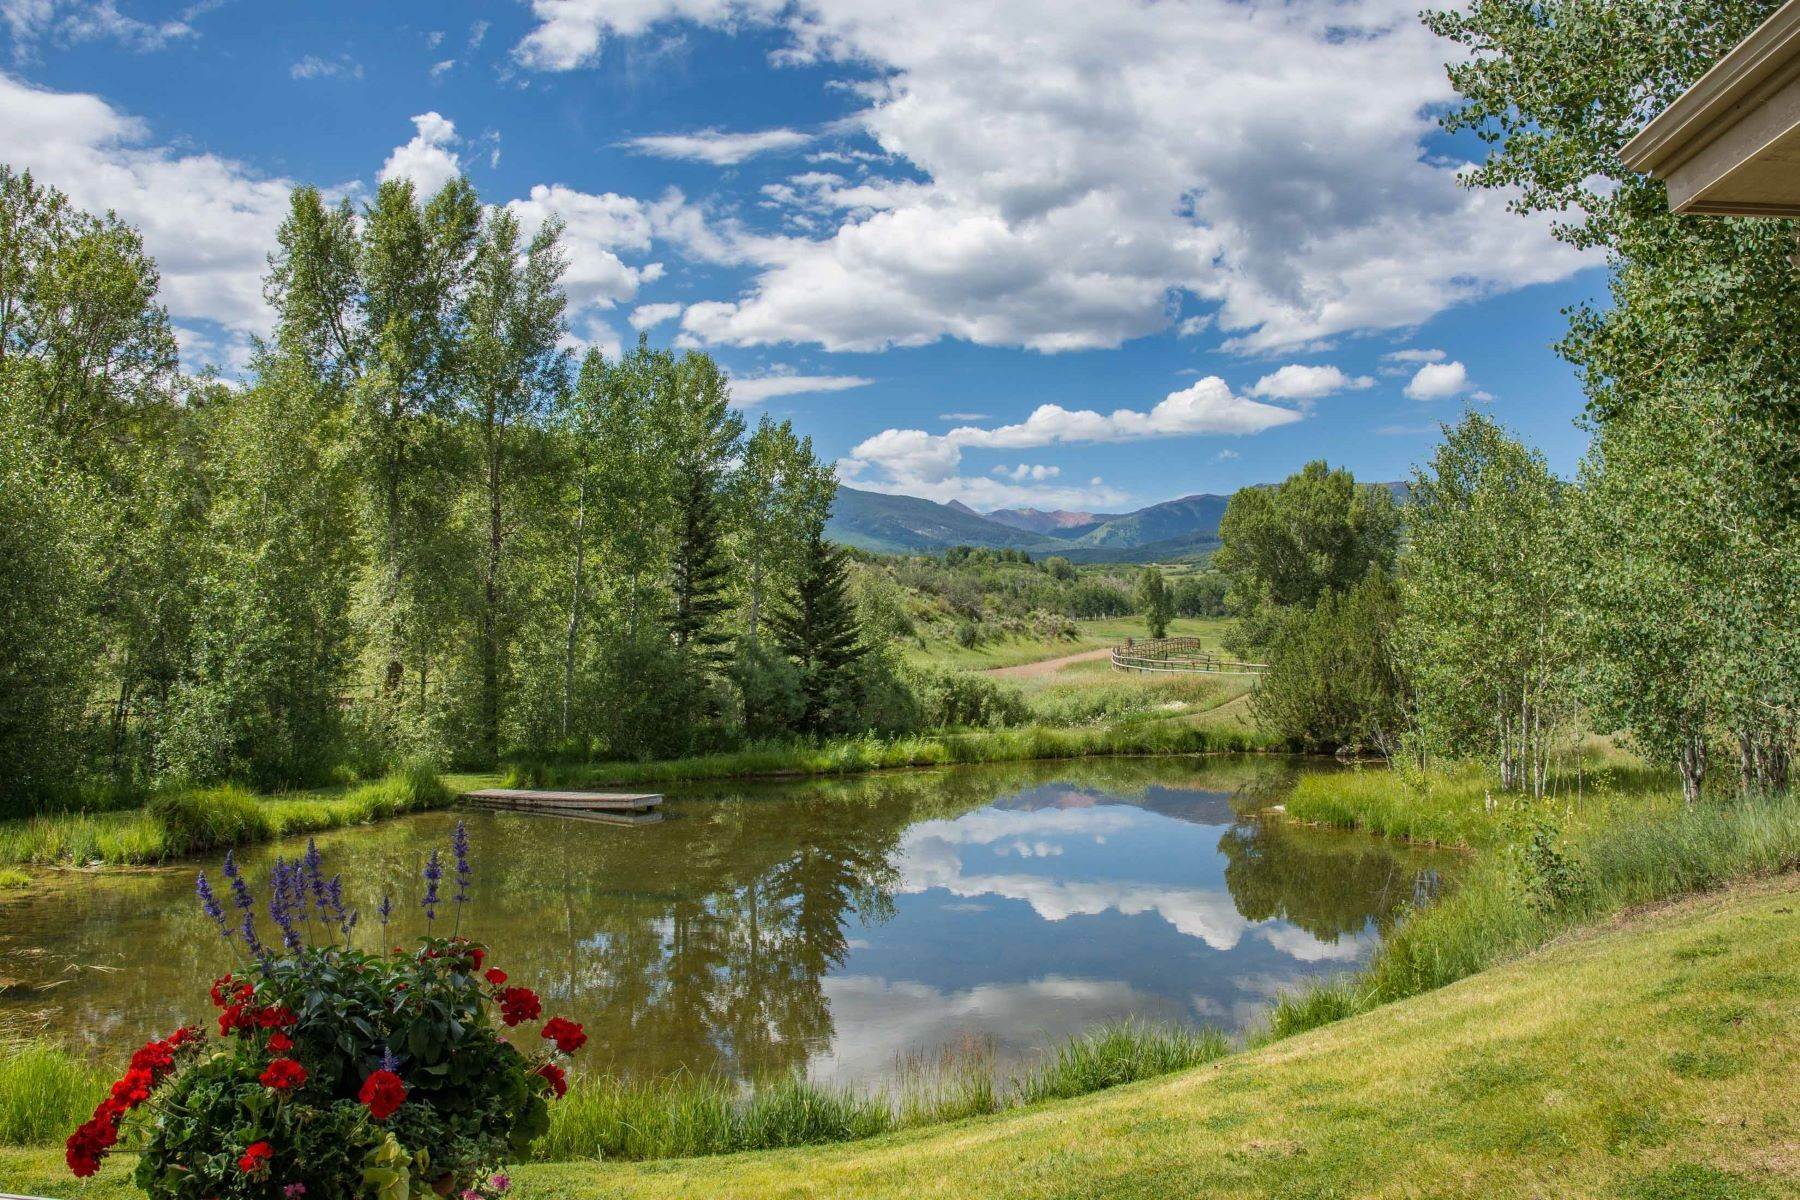 Farm and Ranch Properties için Satış at RARE and UNIQUE opportunity to own the heart of the renowned McCabe Ranch! 1321 Elk Creek & TBD McCabe Ranch, Old Snowmass, Colorado 81654 Amerika Birleşik Devletleri